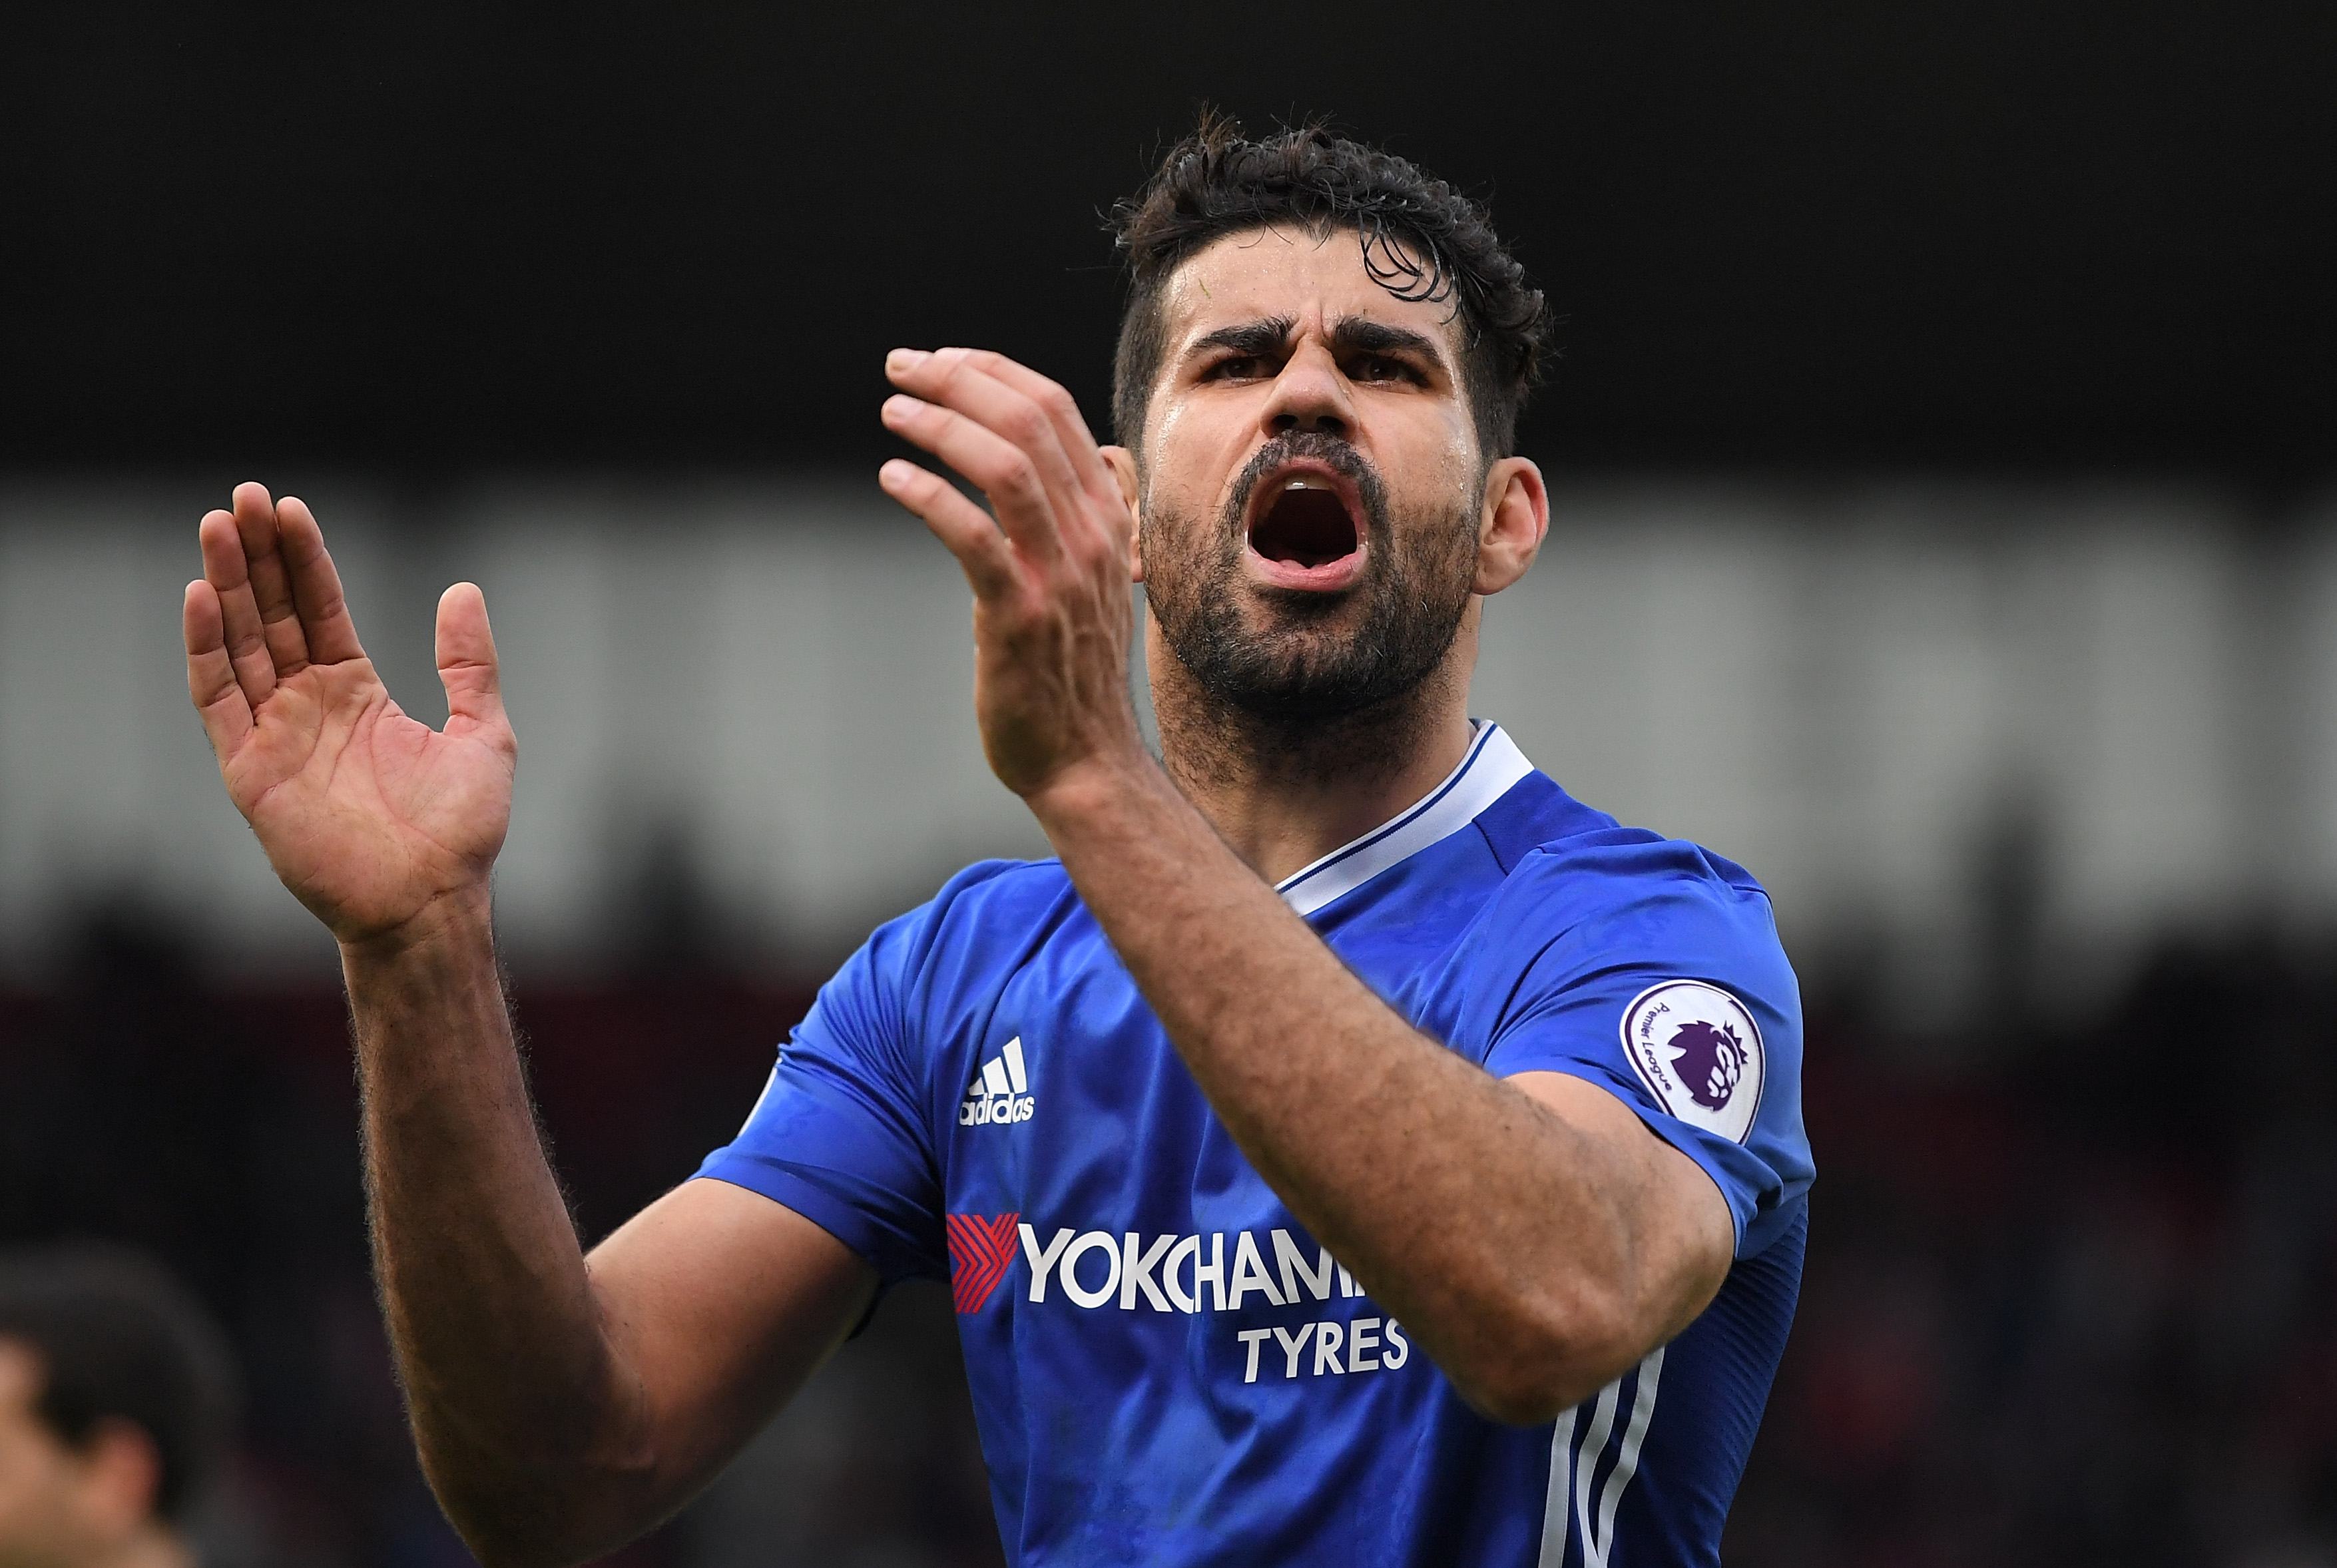 STOKE ON TRENT, ENGLAND - MARCH 18: Diego Costa of Chelsea reacts during the Premier League match between Stoke City and Chelsea at Bet365 Stadium on March 18, 2017 in Stoke on Trent, England.  (Photo by Laurence Griffiths/Getty Images)